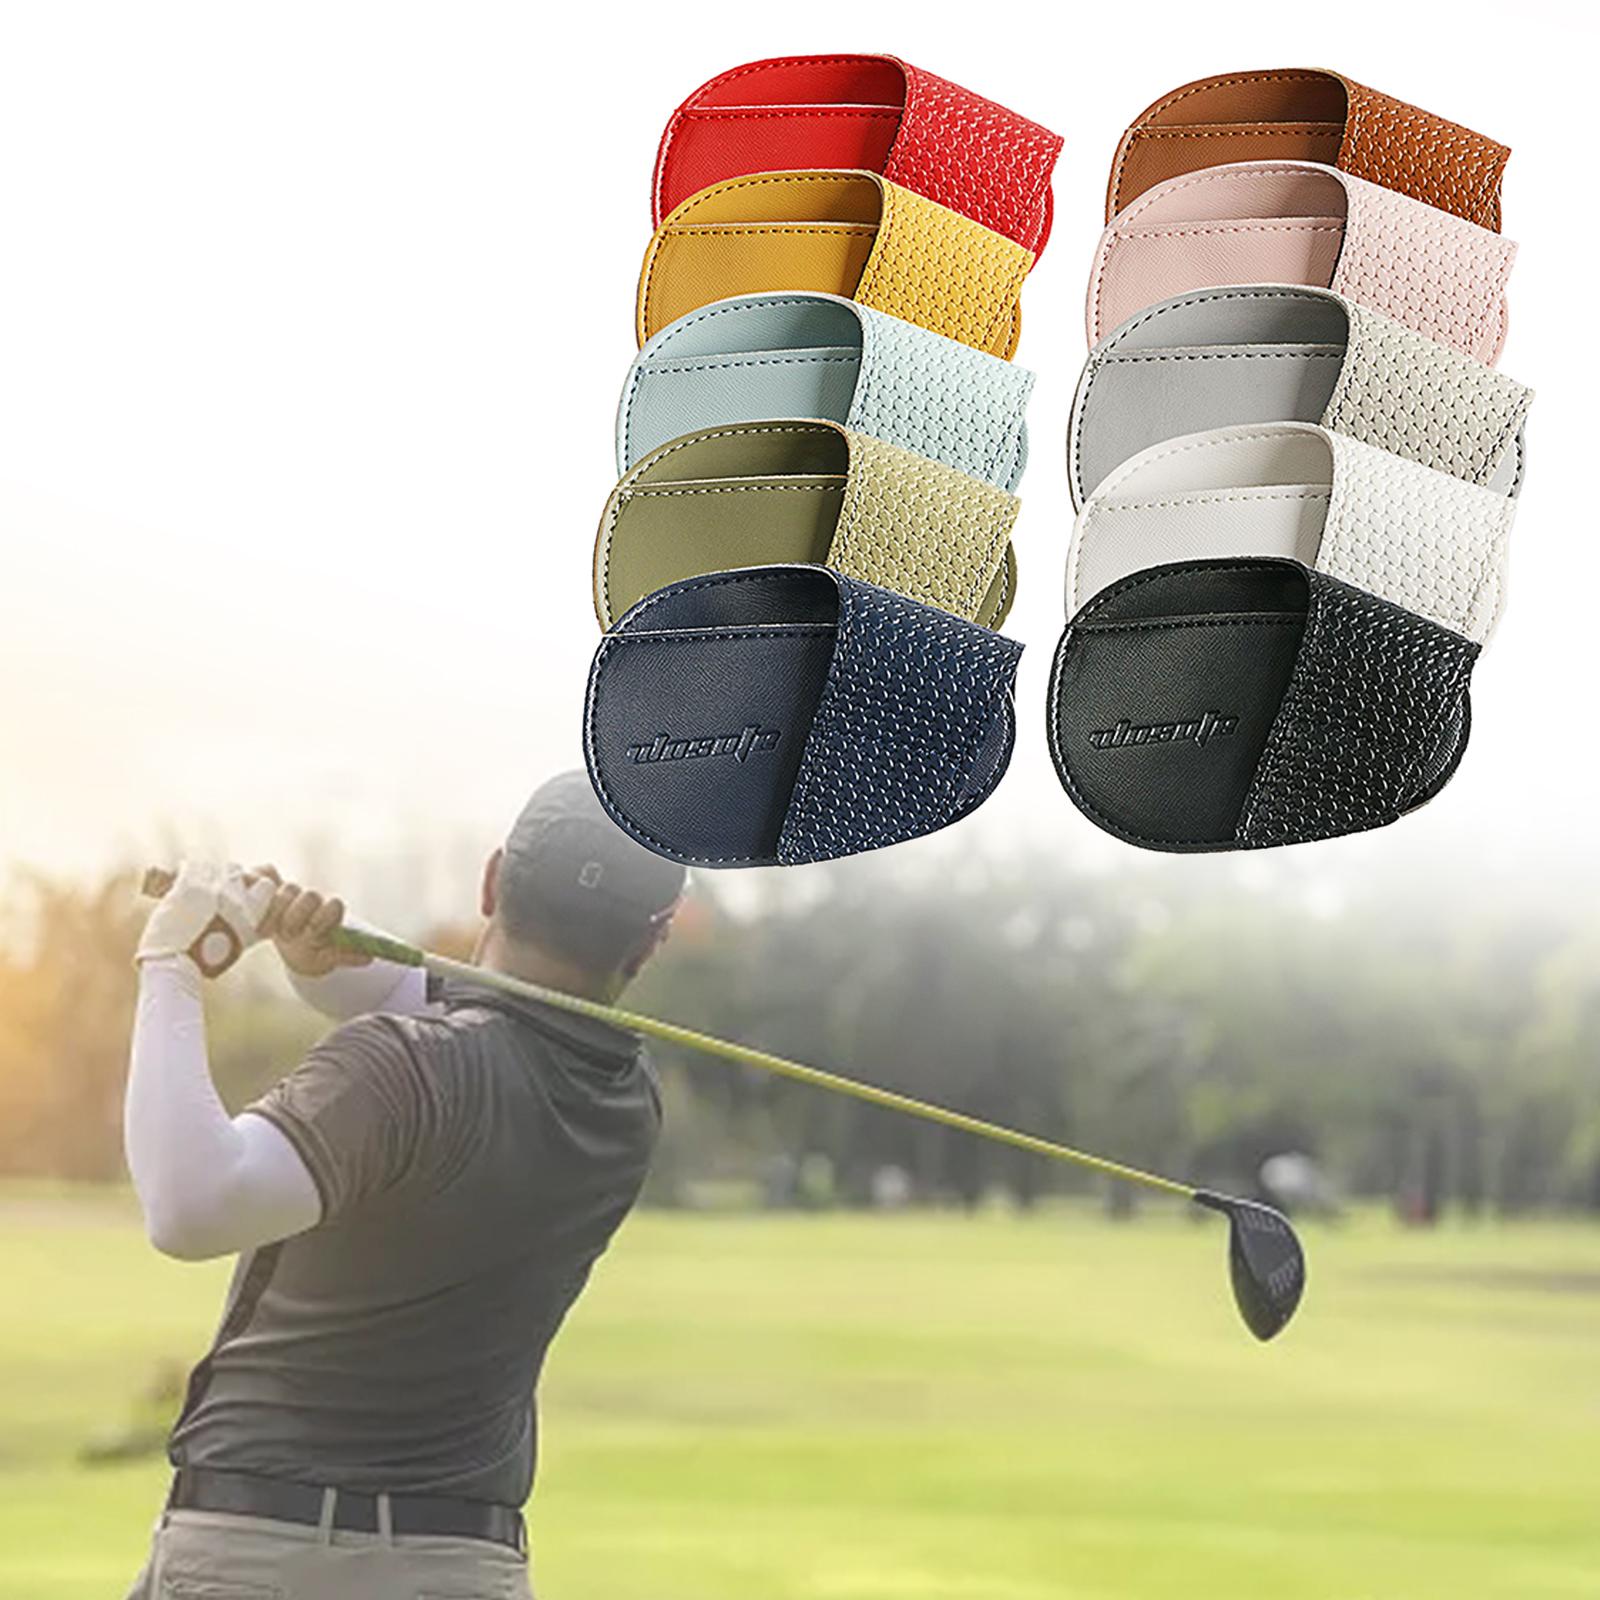 Golf Head Covers PU Portable Protector for Athlete Travel Golf Training Multi Color Large